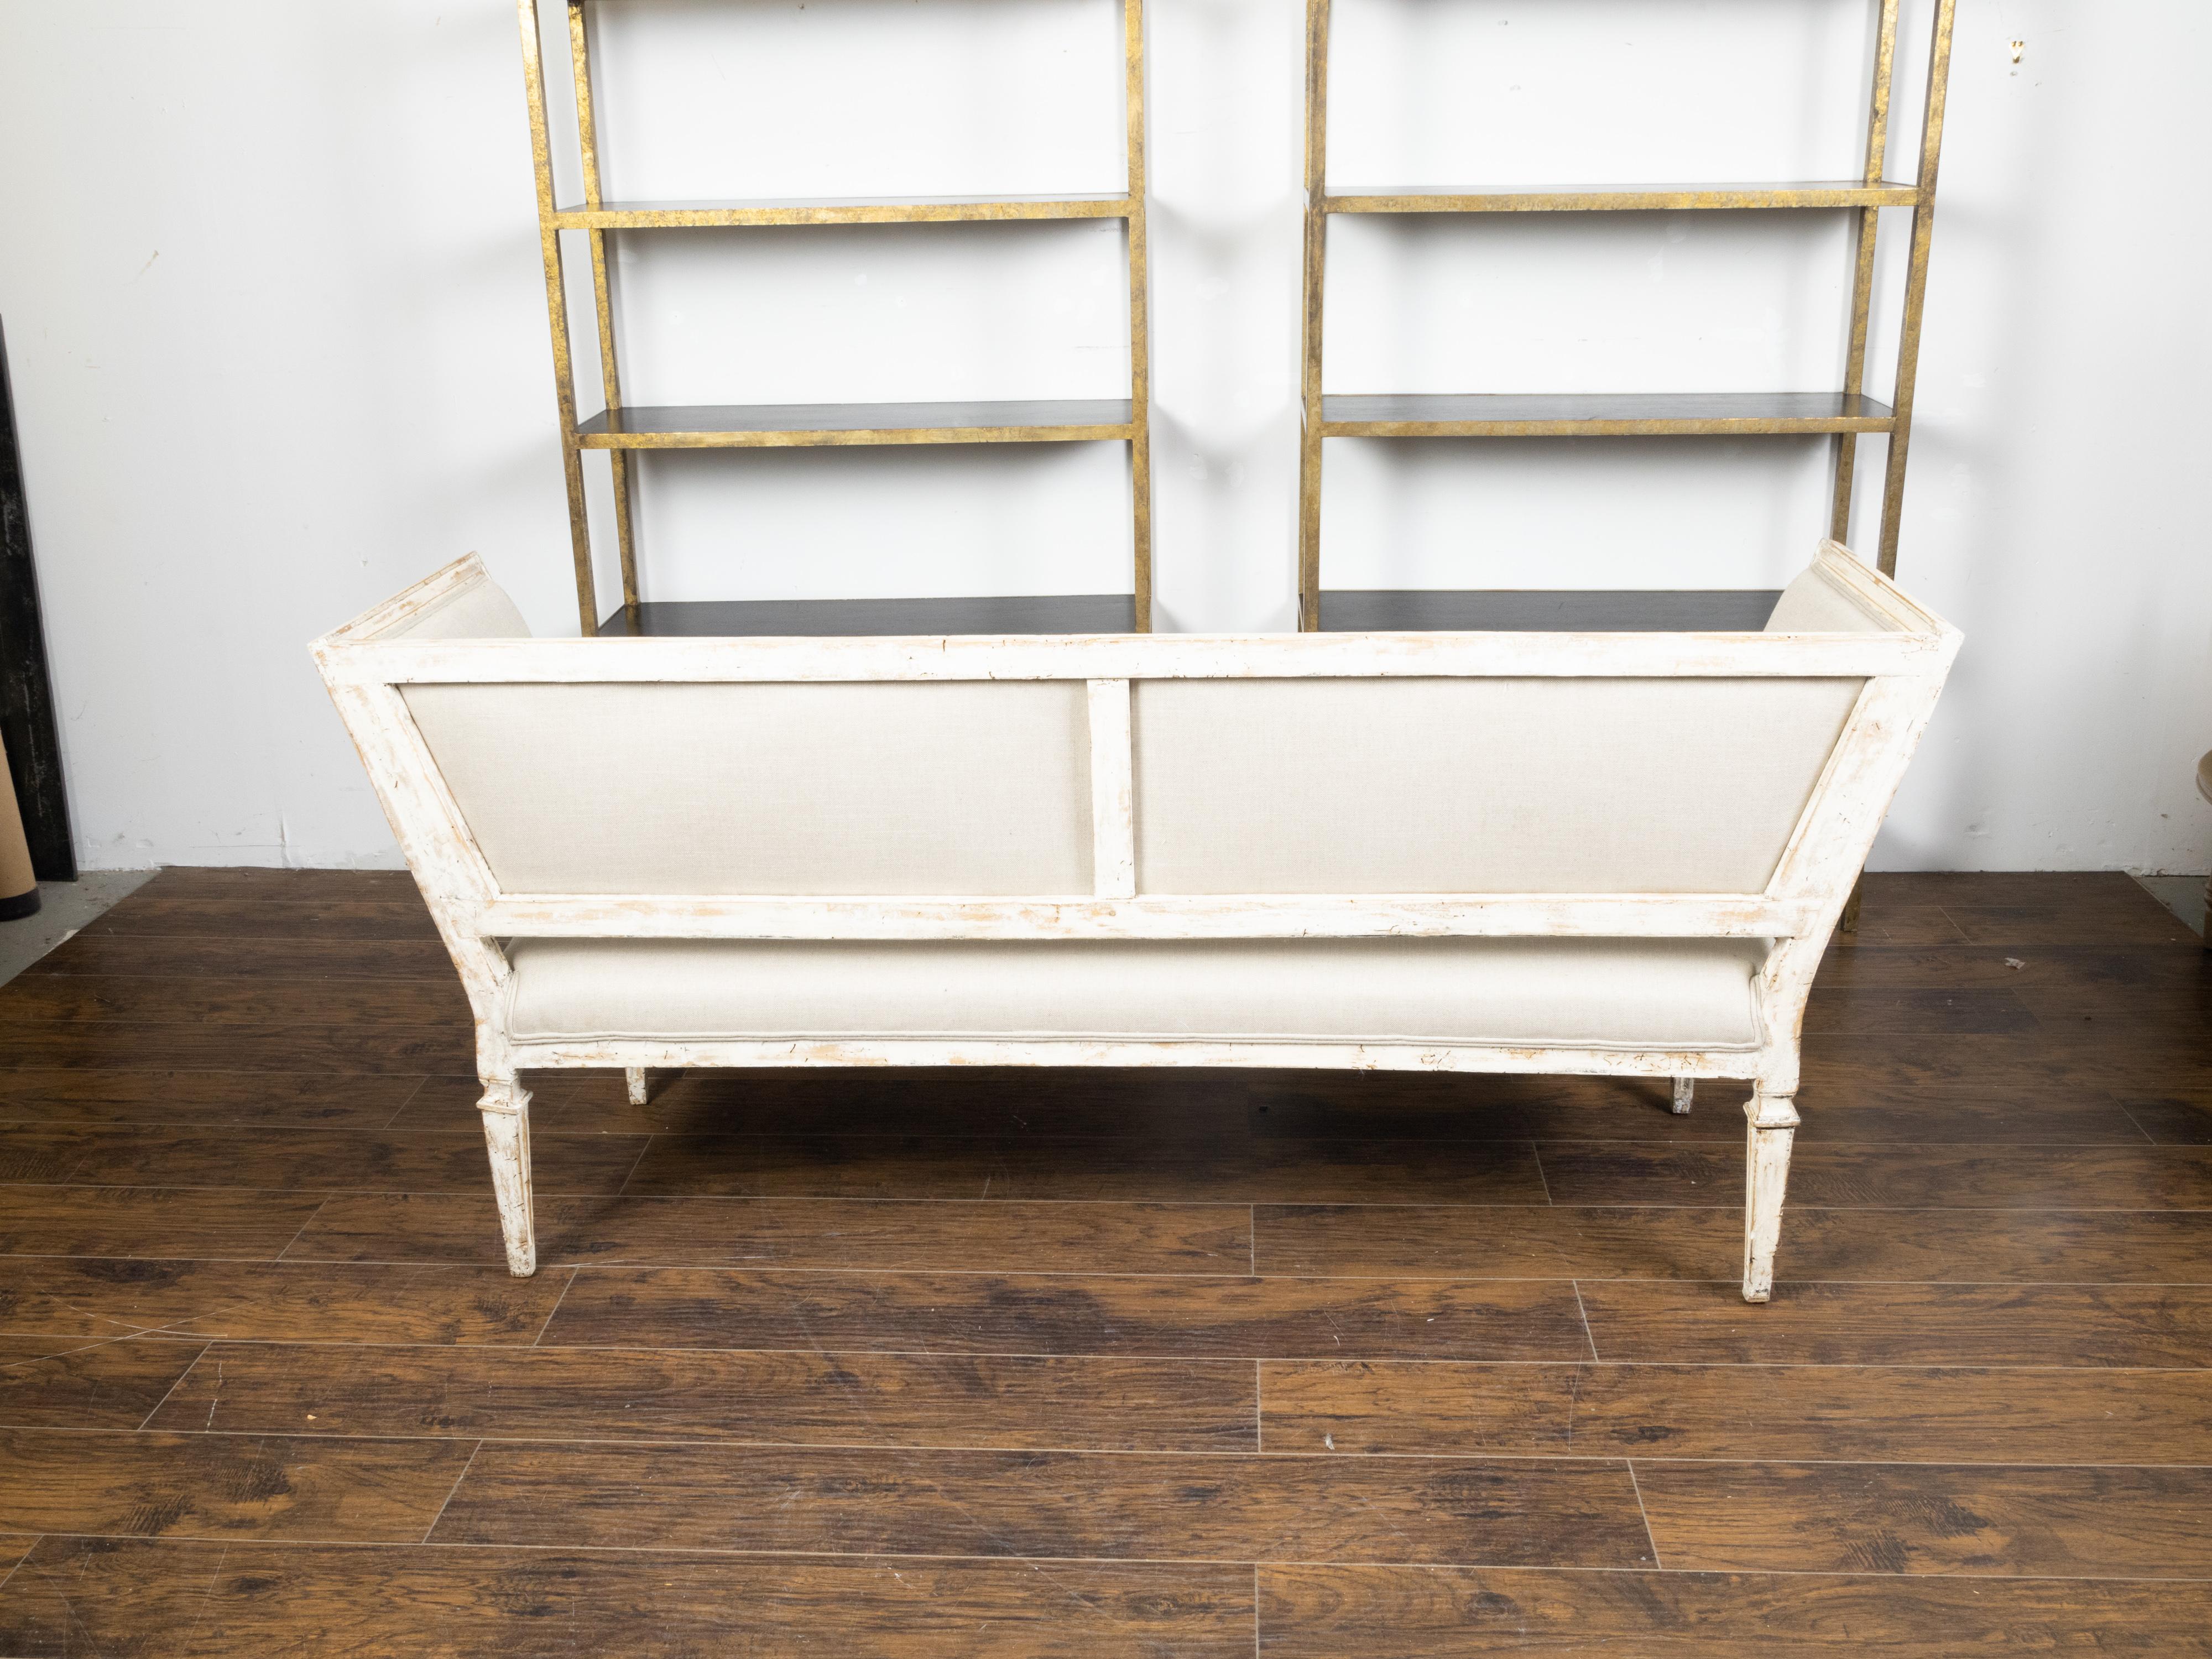 Italian 19th Century White Painted Sofa with Slanted Sides and Distressed Patina For Sale 2